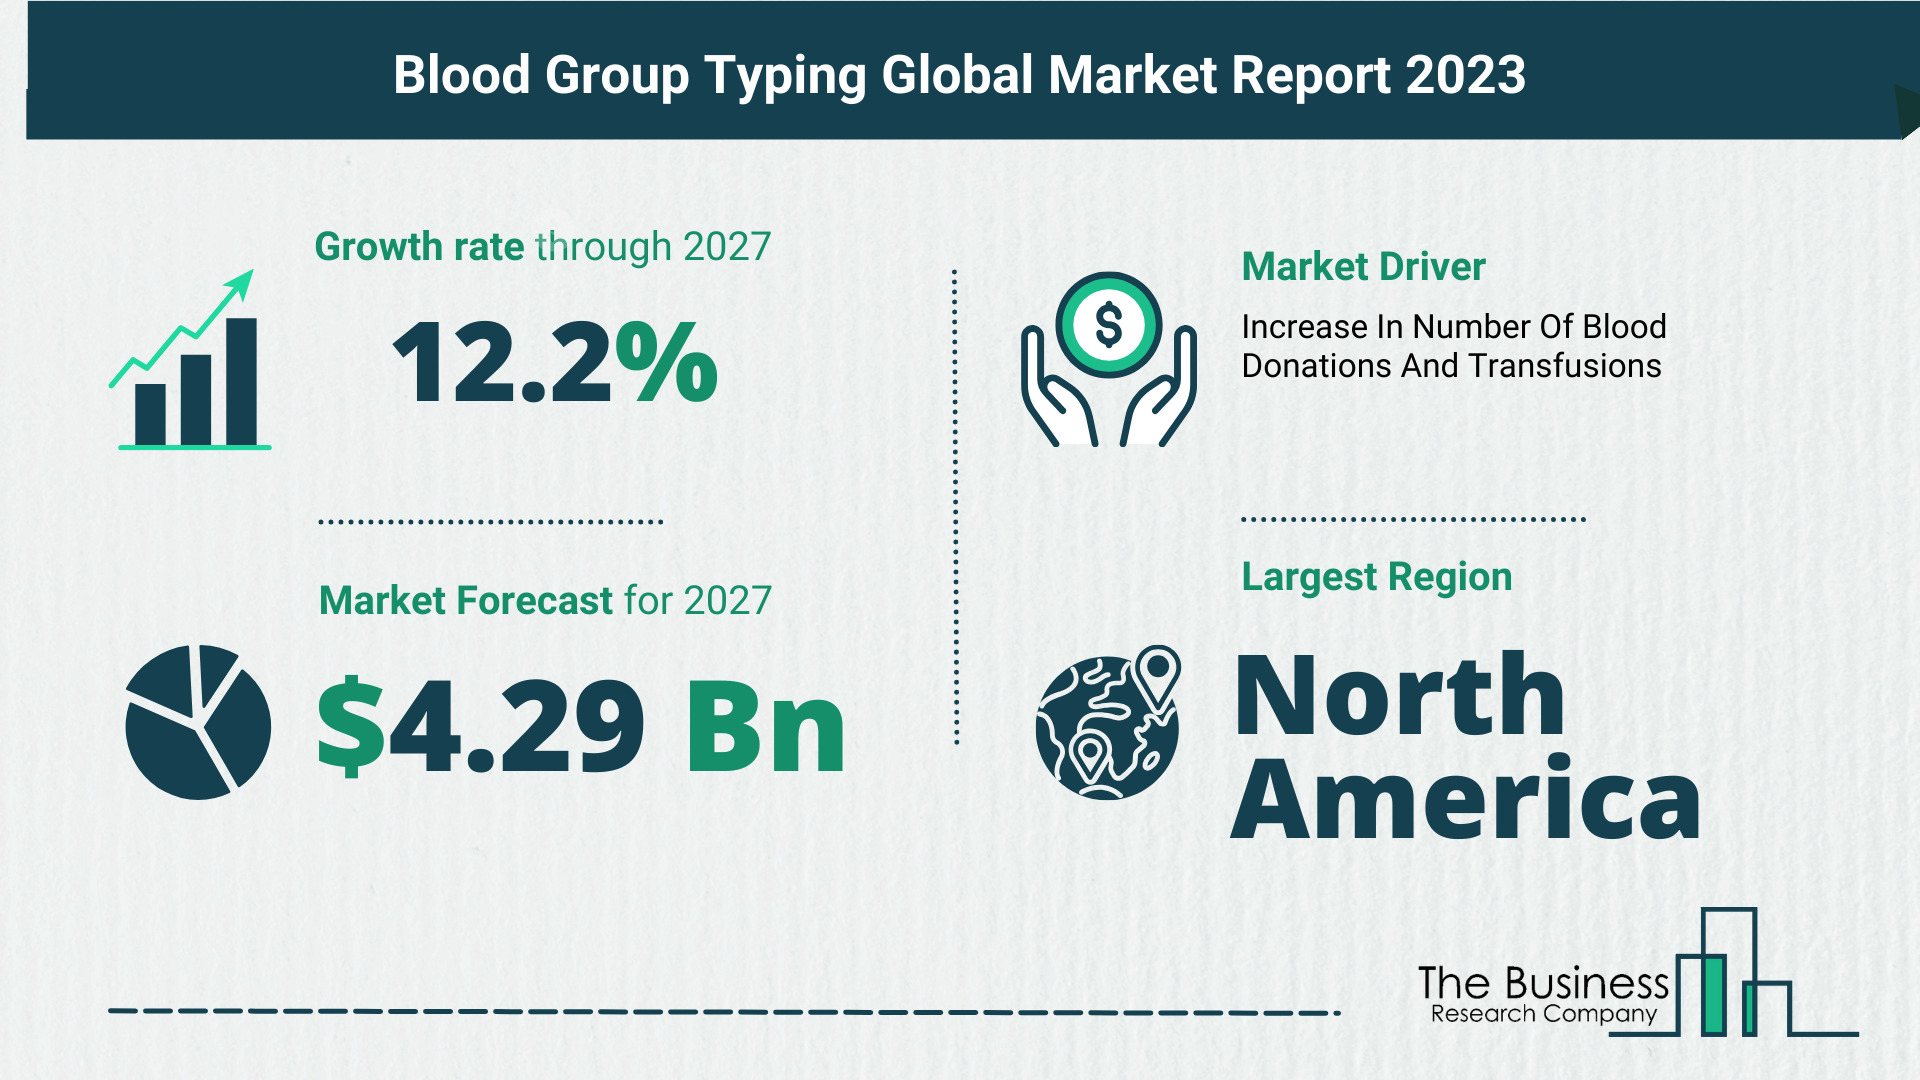 Overview Of The Blood Group Typing Market 2023: Size, Drivers, And Trends